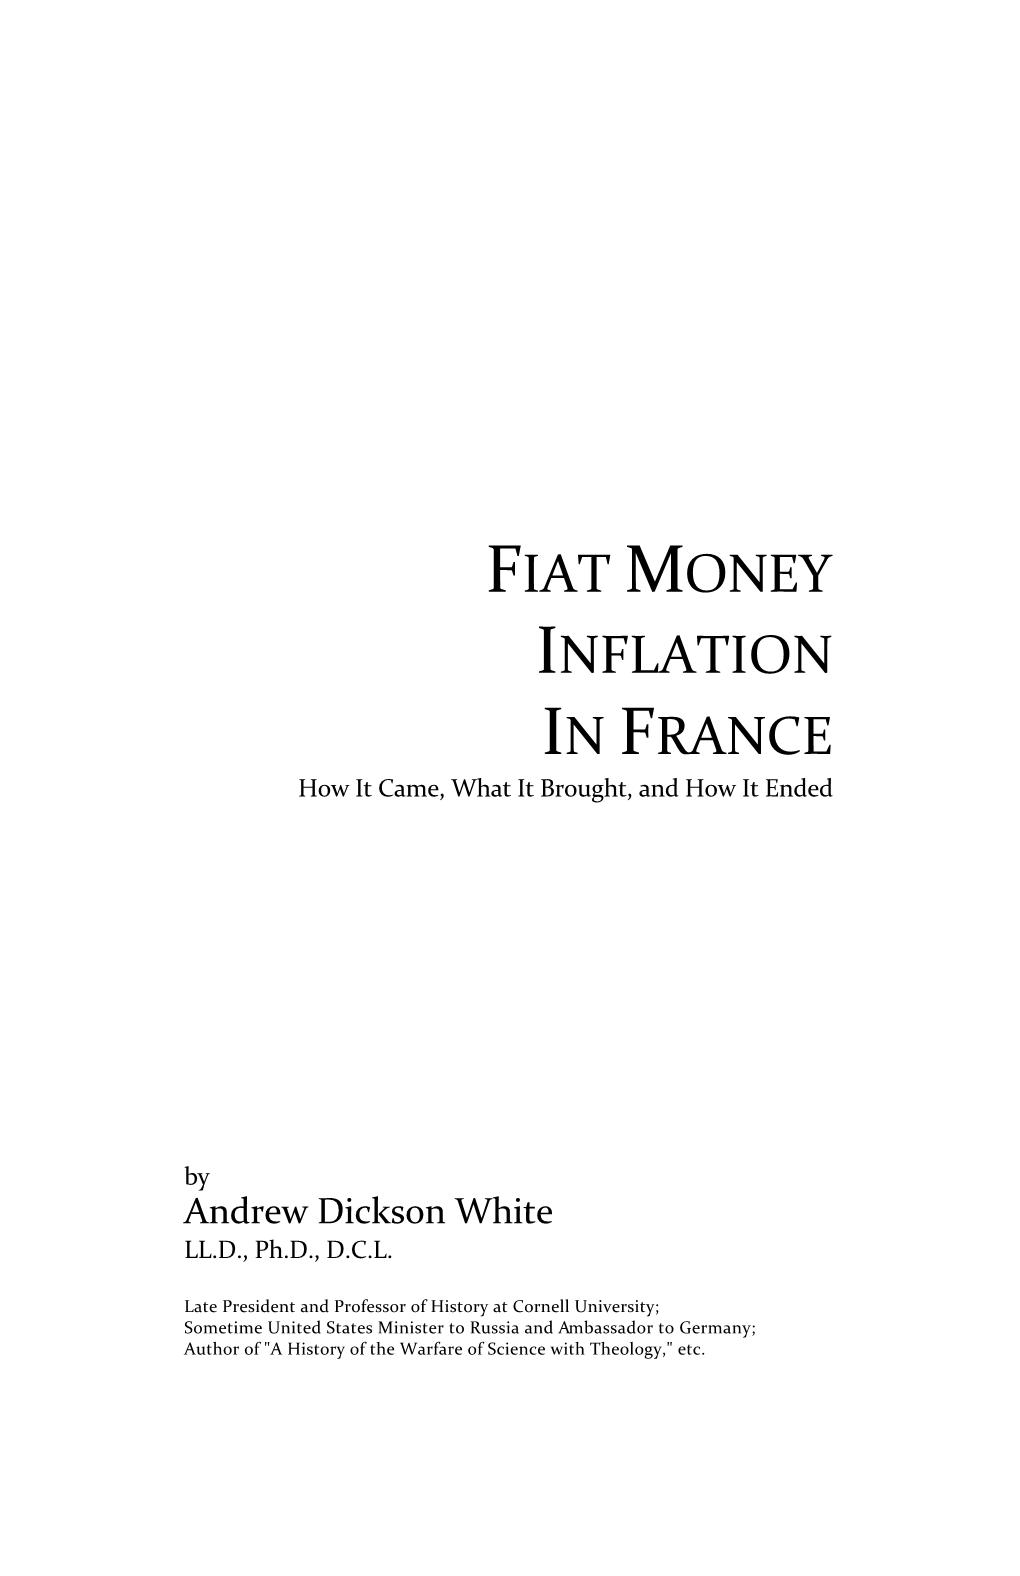 FIAT MONEY INFLATION in FRANCE How It Came, What It Brought, and How It Ended